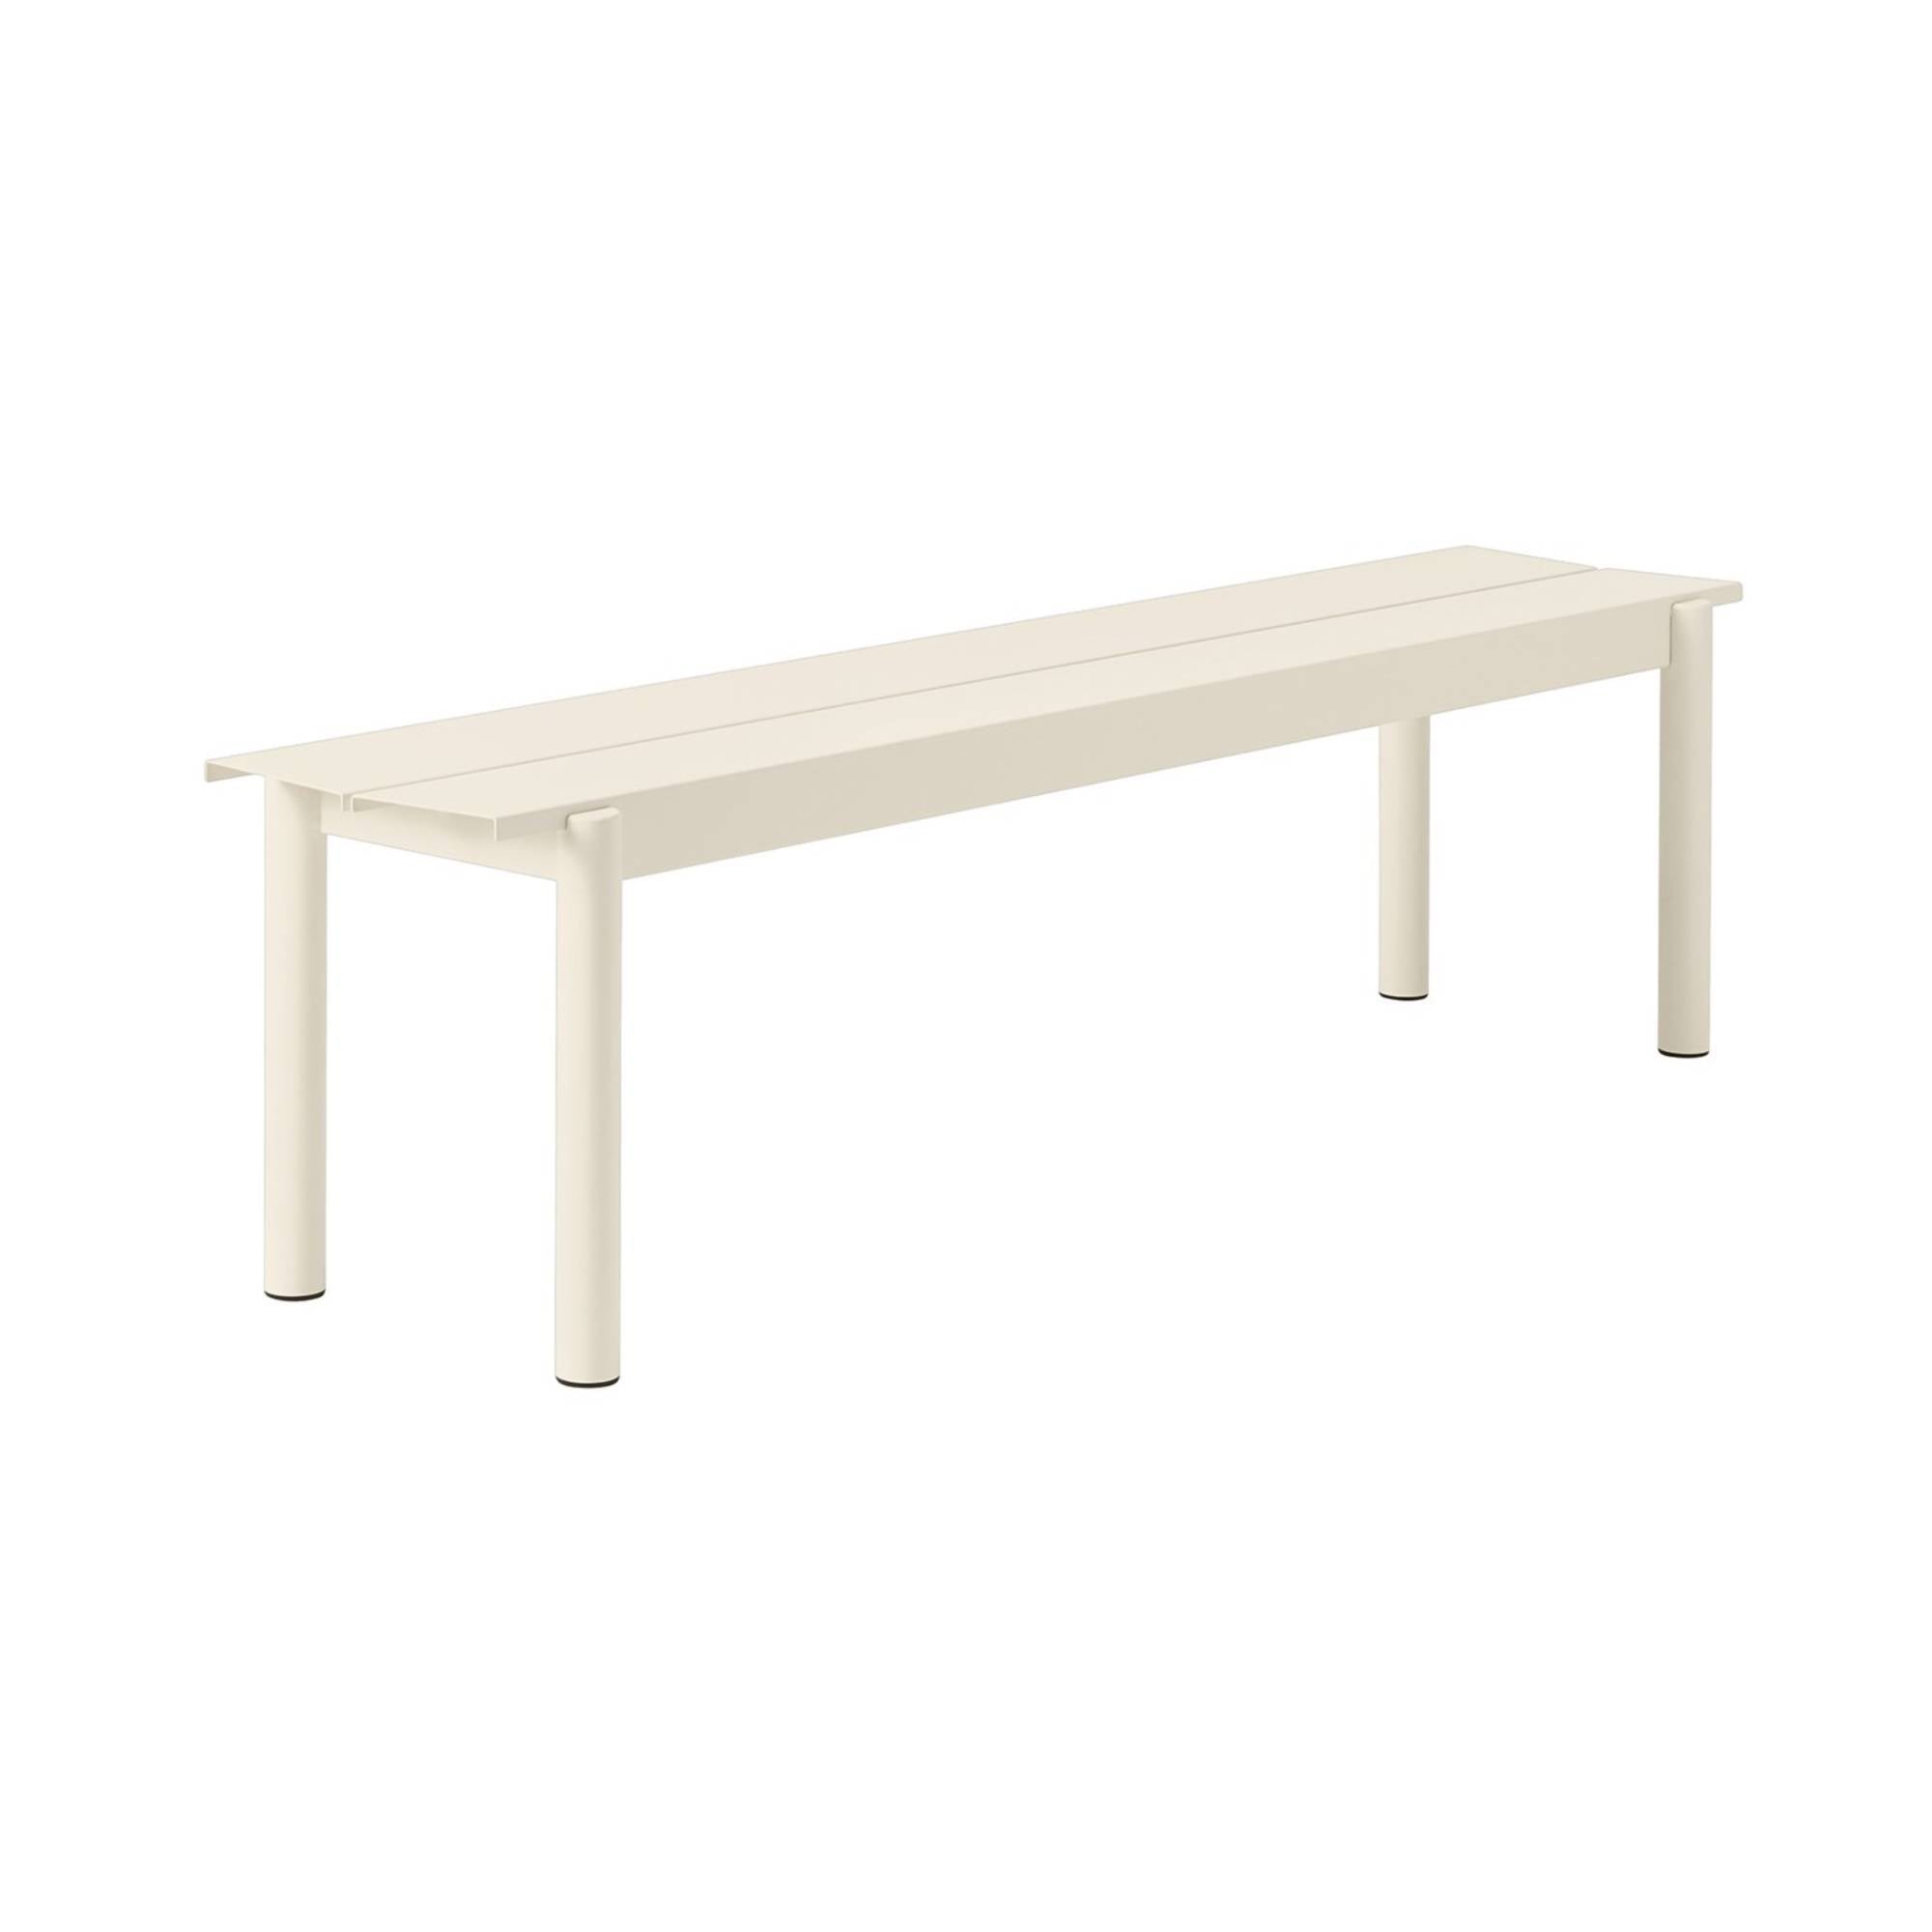 Linear Steel Bench: Large - 66.9